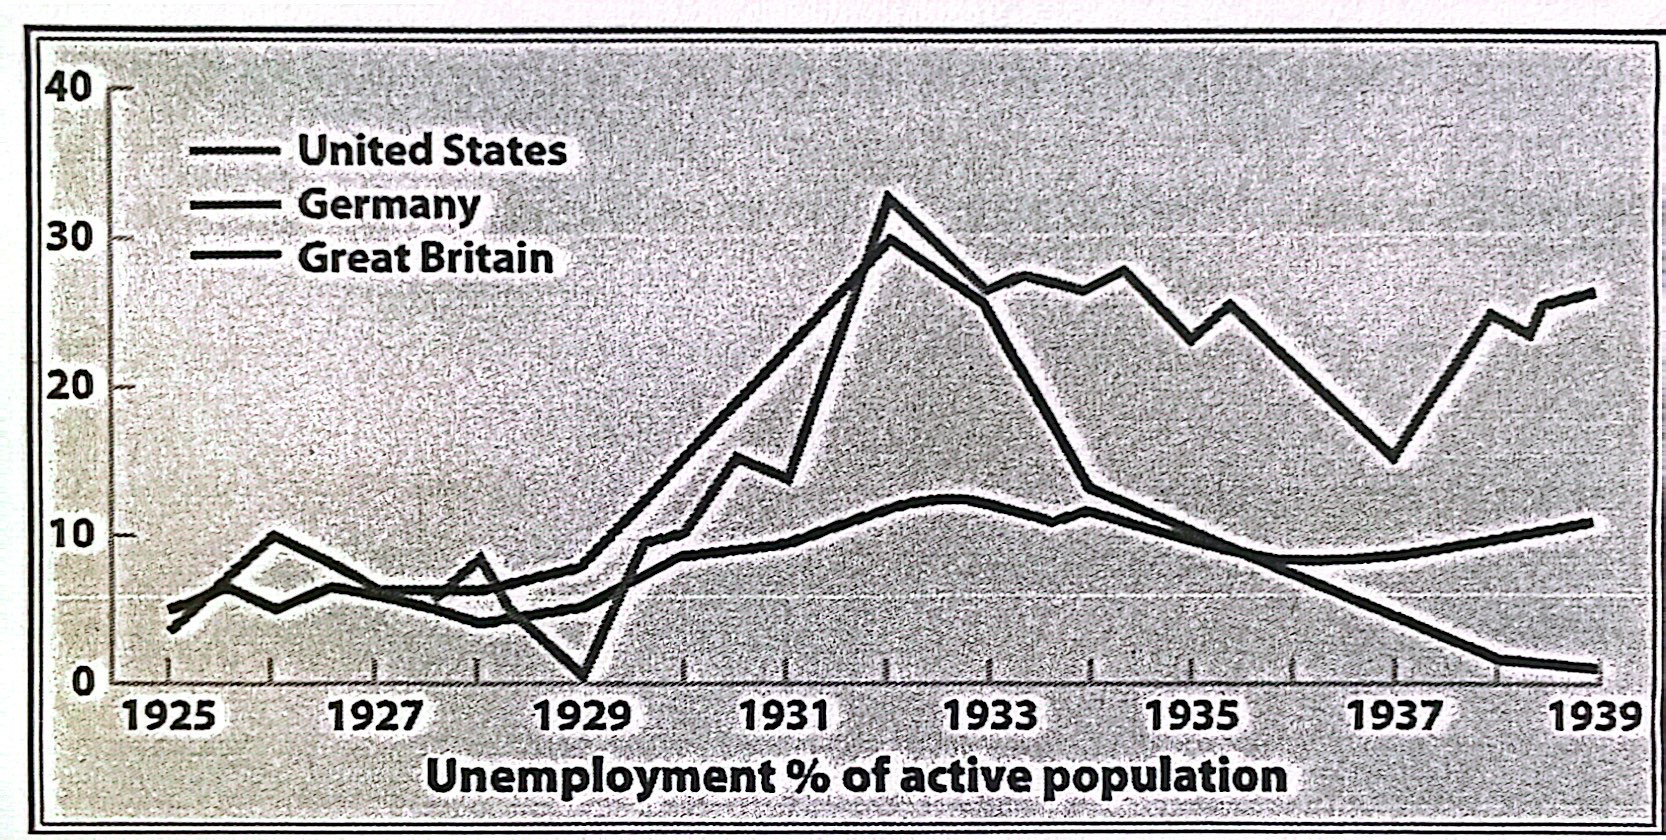 <p><strong>11-10.</strong> Which of the following conclusions is supported by the data in the chart above?</p><p>a) Unemployment declined in Germany as a result of the rearmament program launched by the Nazi Party<br>b) Unemployment in Germany, Britain, and the U.S. was at its highest when the Great Depression started<br>c) The movement of women into the labor force directly affected unemployment rates<br>d) Republican forms of government were the most effective at confronting the root causes of unemployment</p>